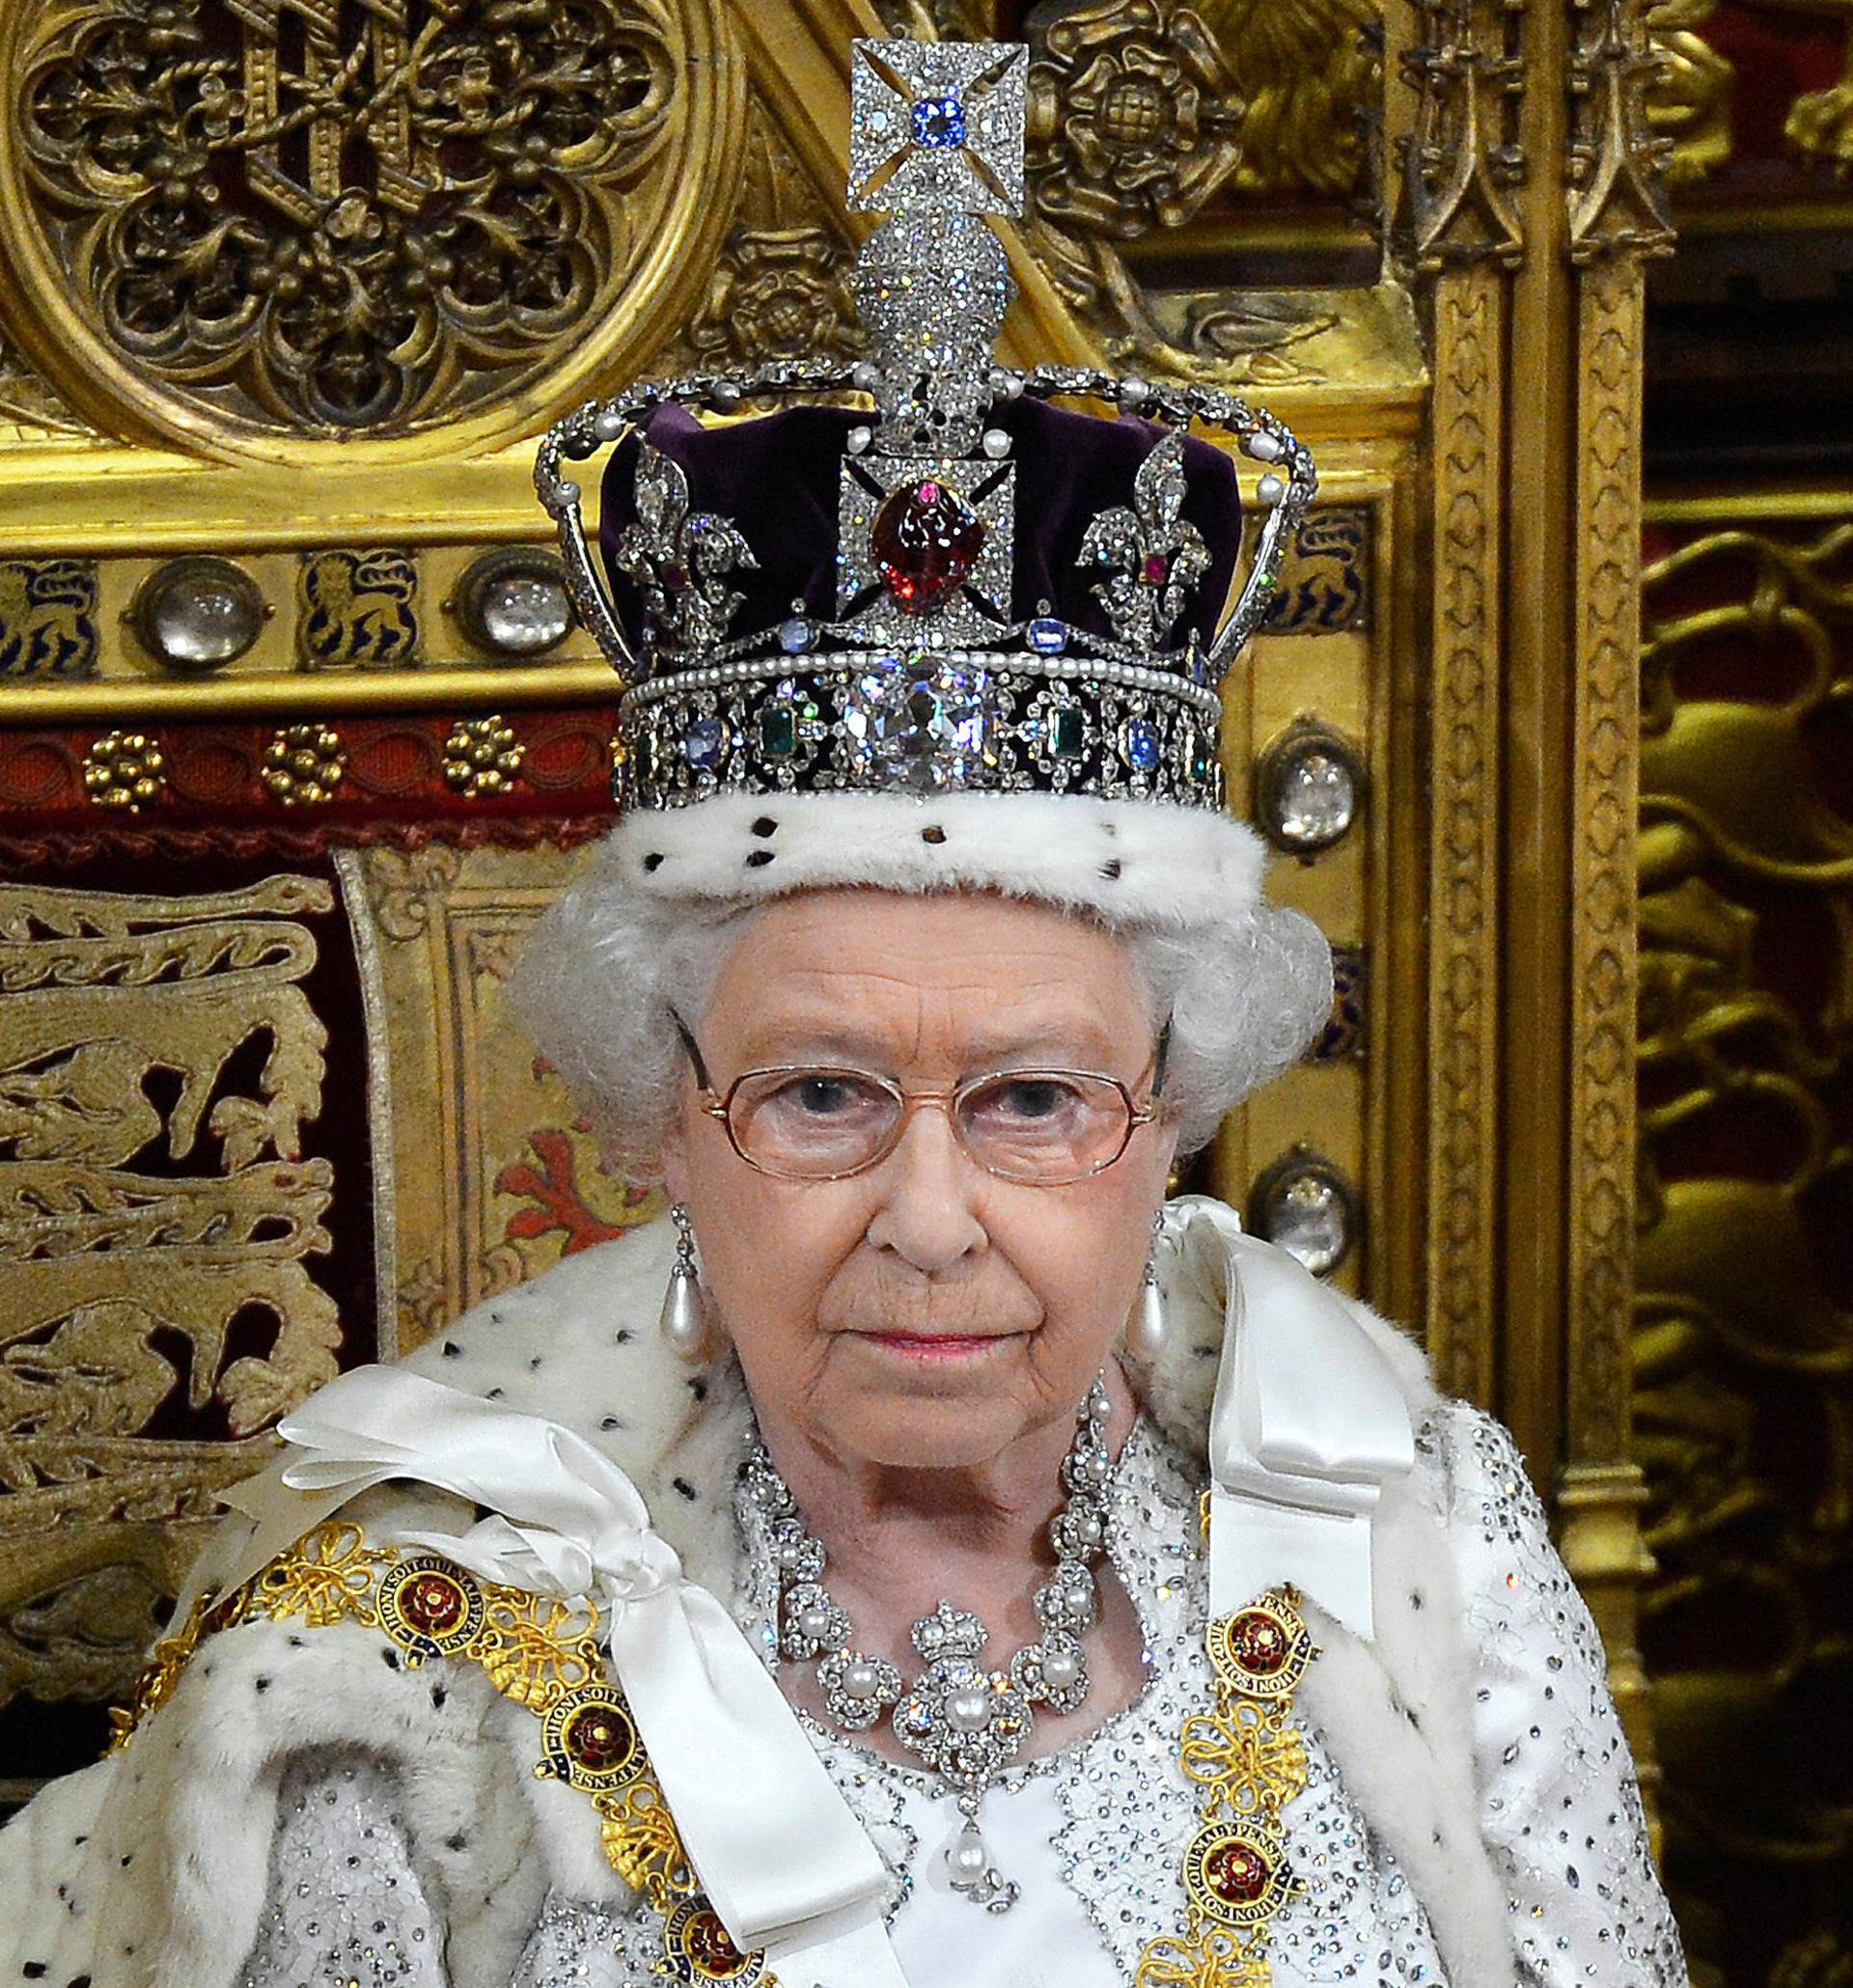 FILE PHOTO: Britain's Queen Elizabeth waits before delivering her speech in the House of Lords, during the State Opening of Parliament at the Palace of Westminster in London